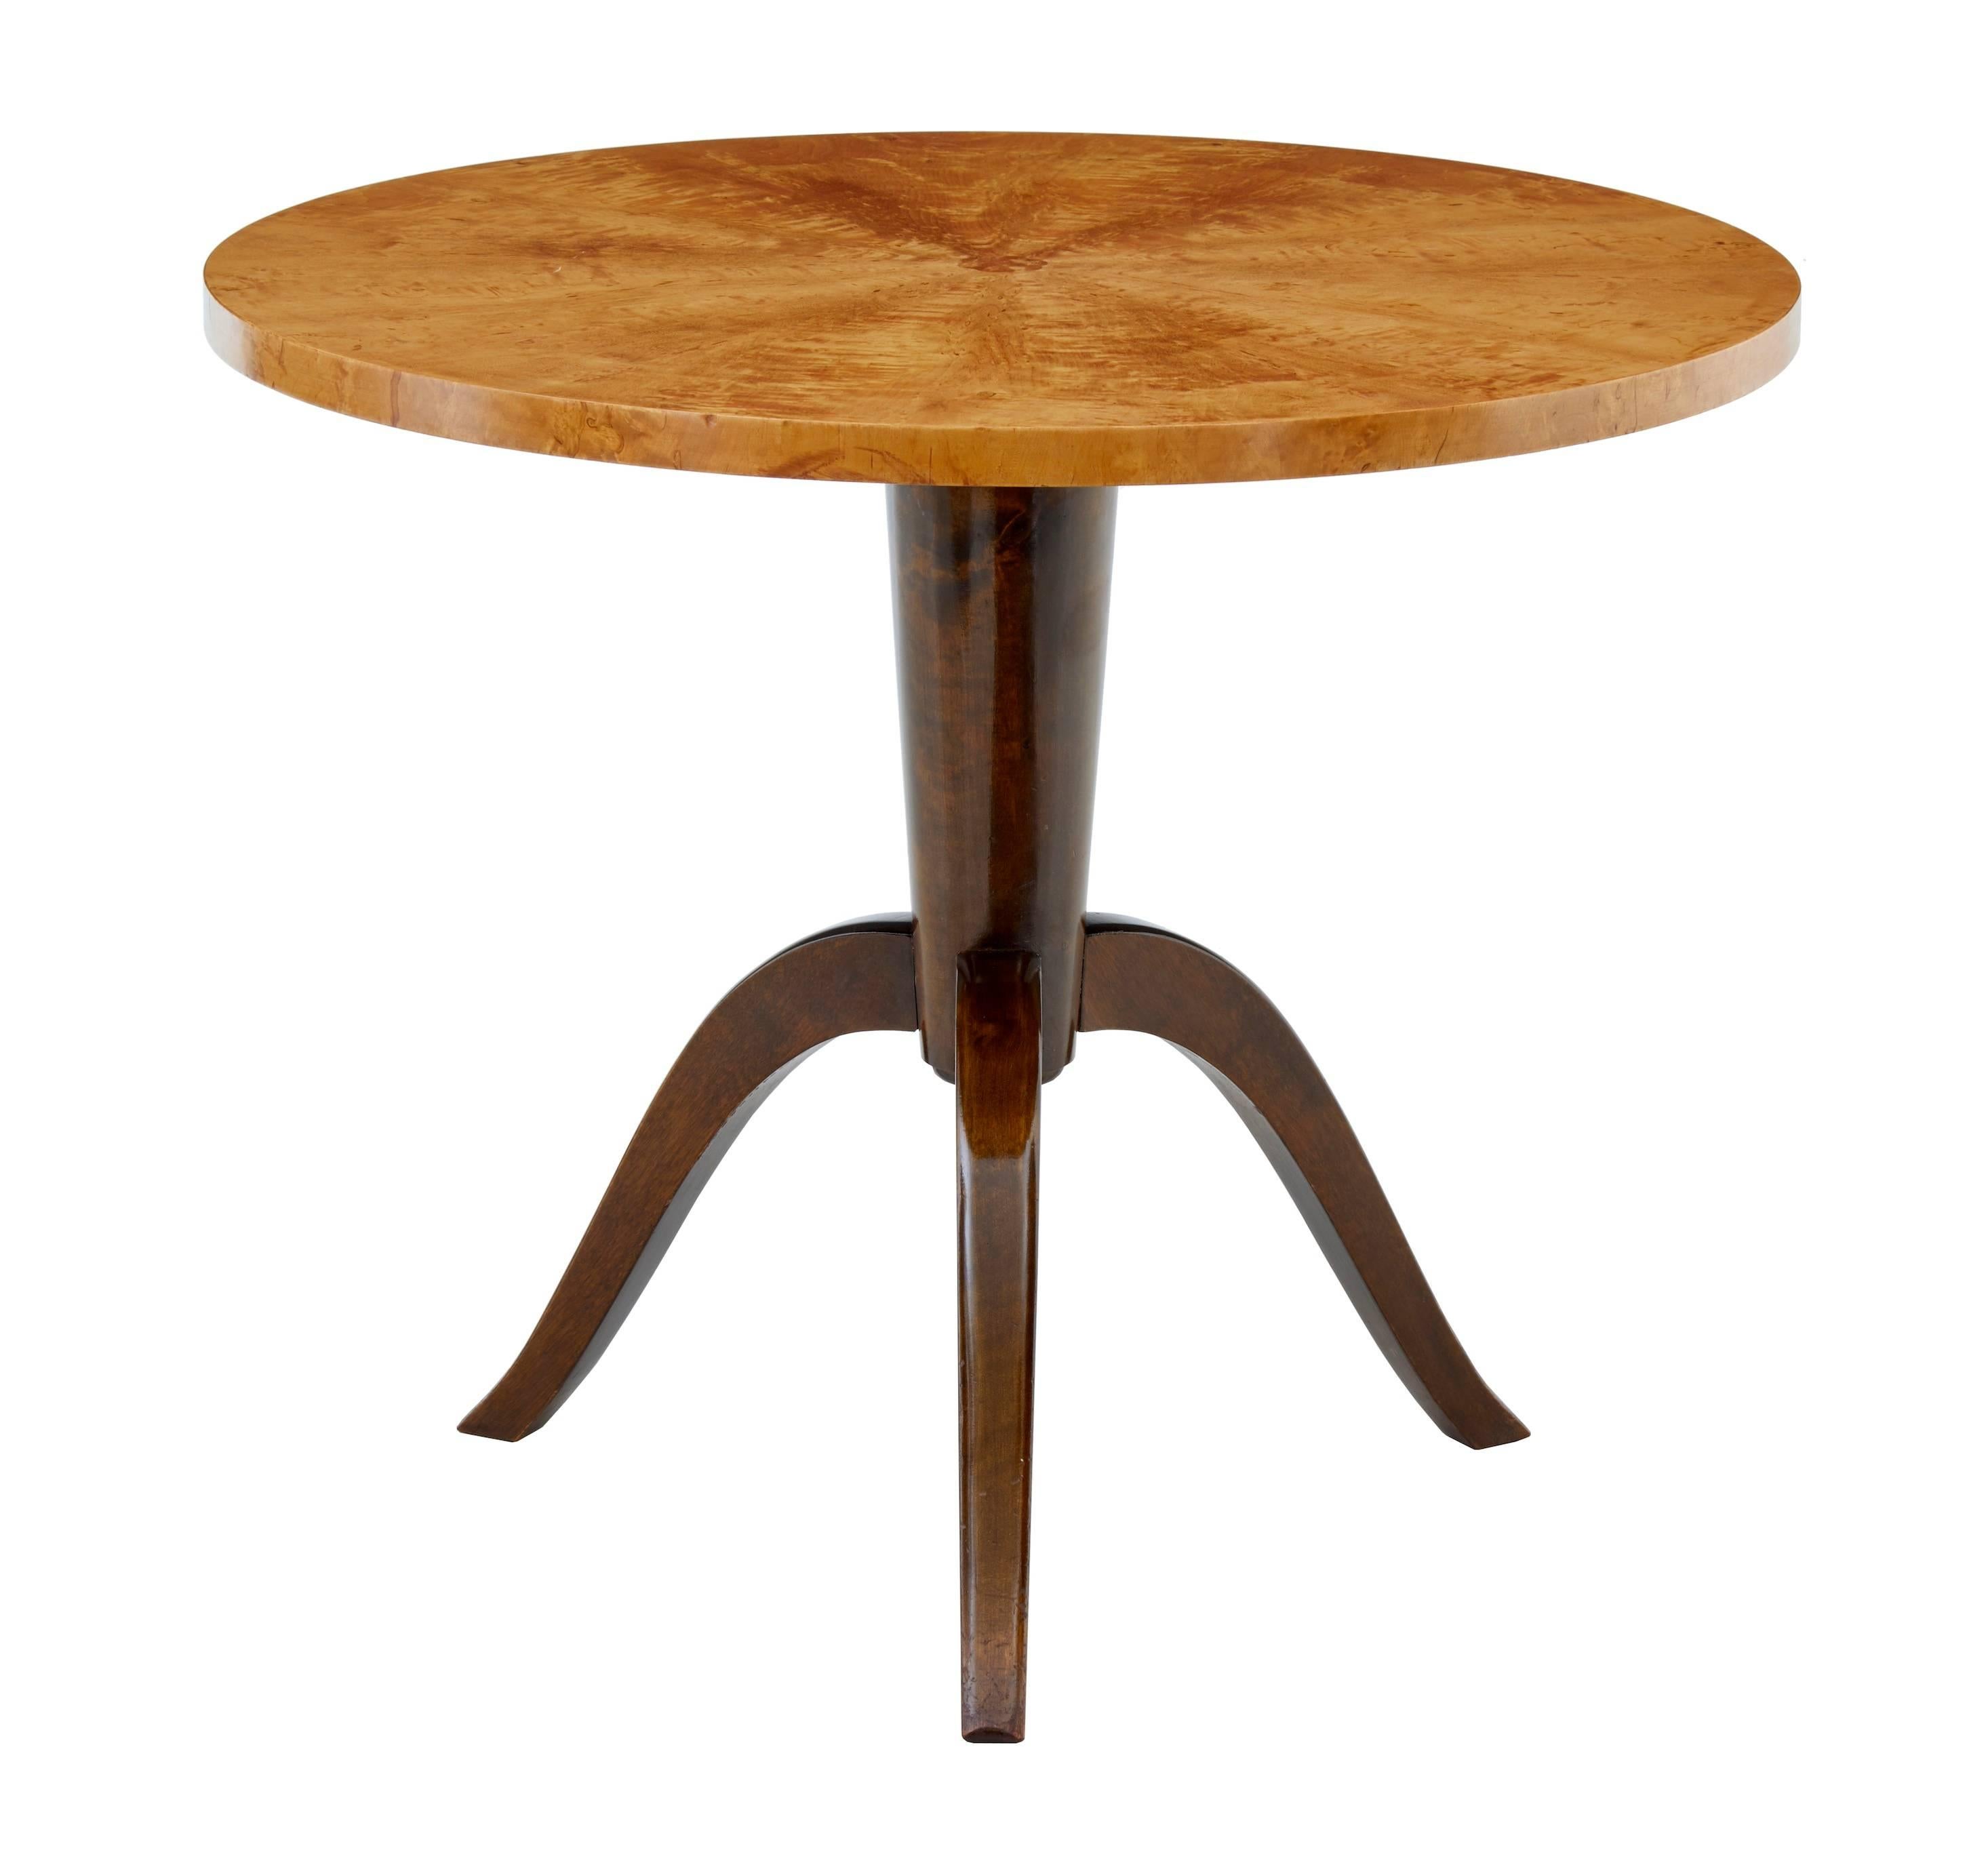 Circular occasional table, circa 1950.
Stunning burr birch veneered top which has recently be re-polished.
Standing on contrasting dark birch tripod base.

Measures: Height 23